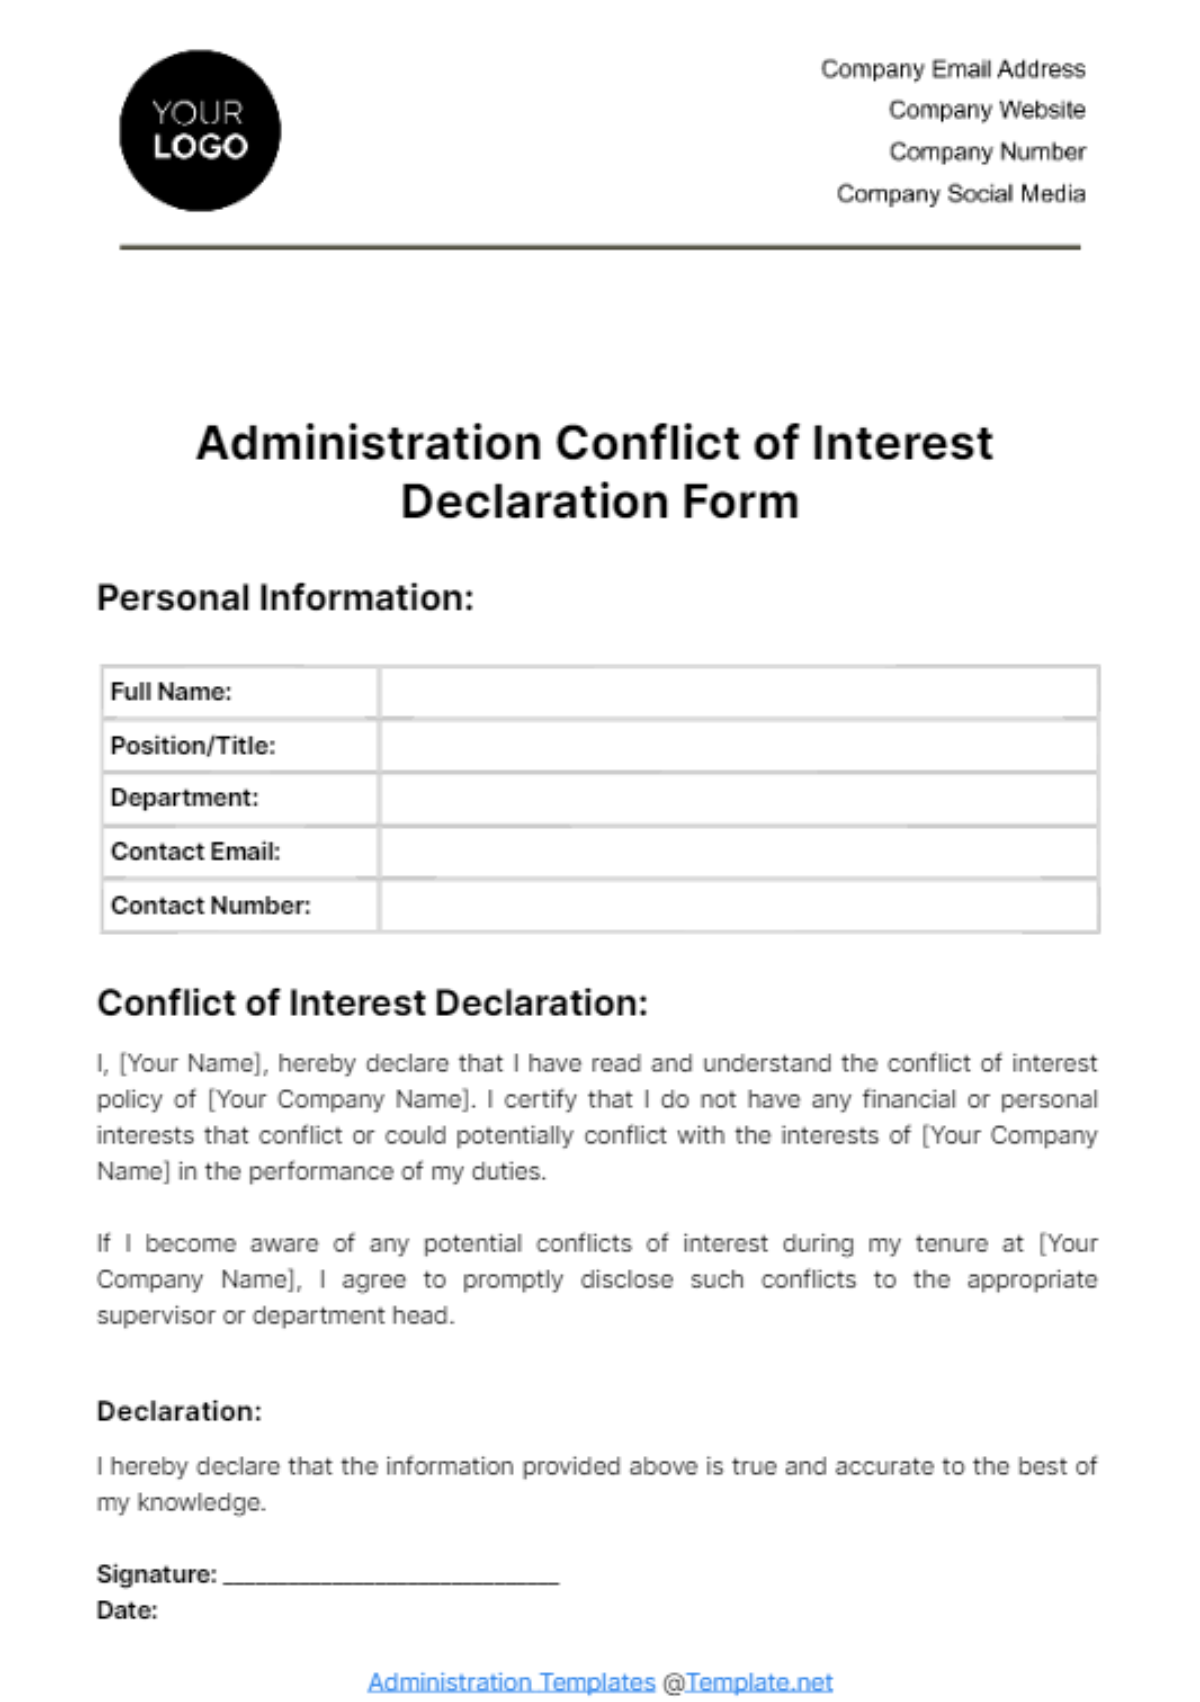 Administration Conflict of Interest Declaration Form Template